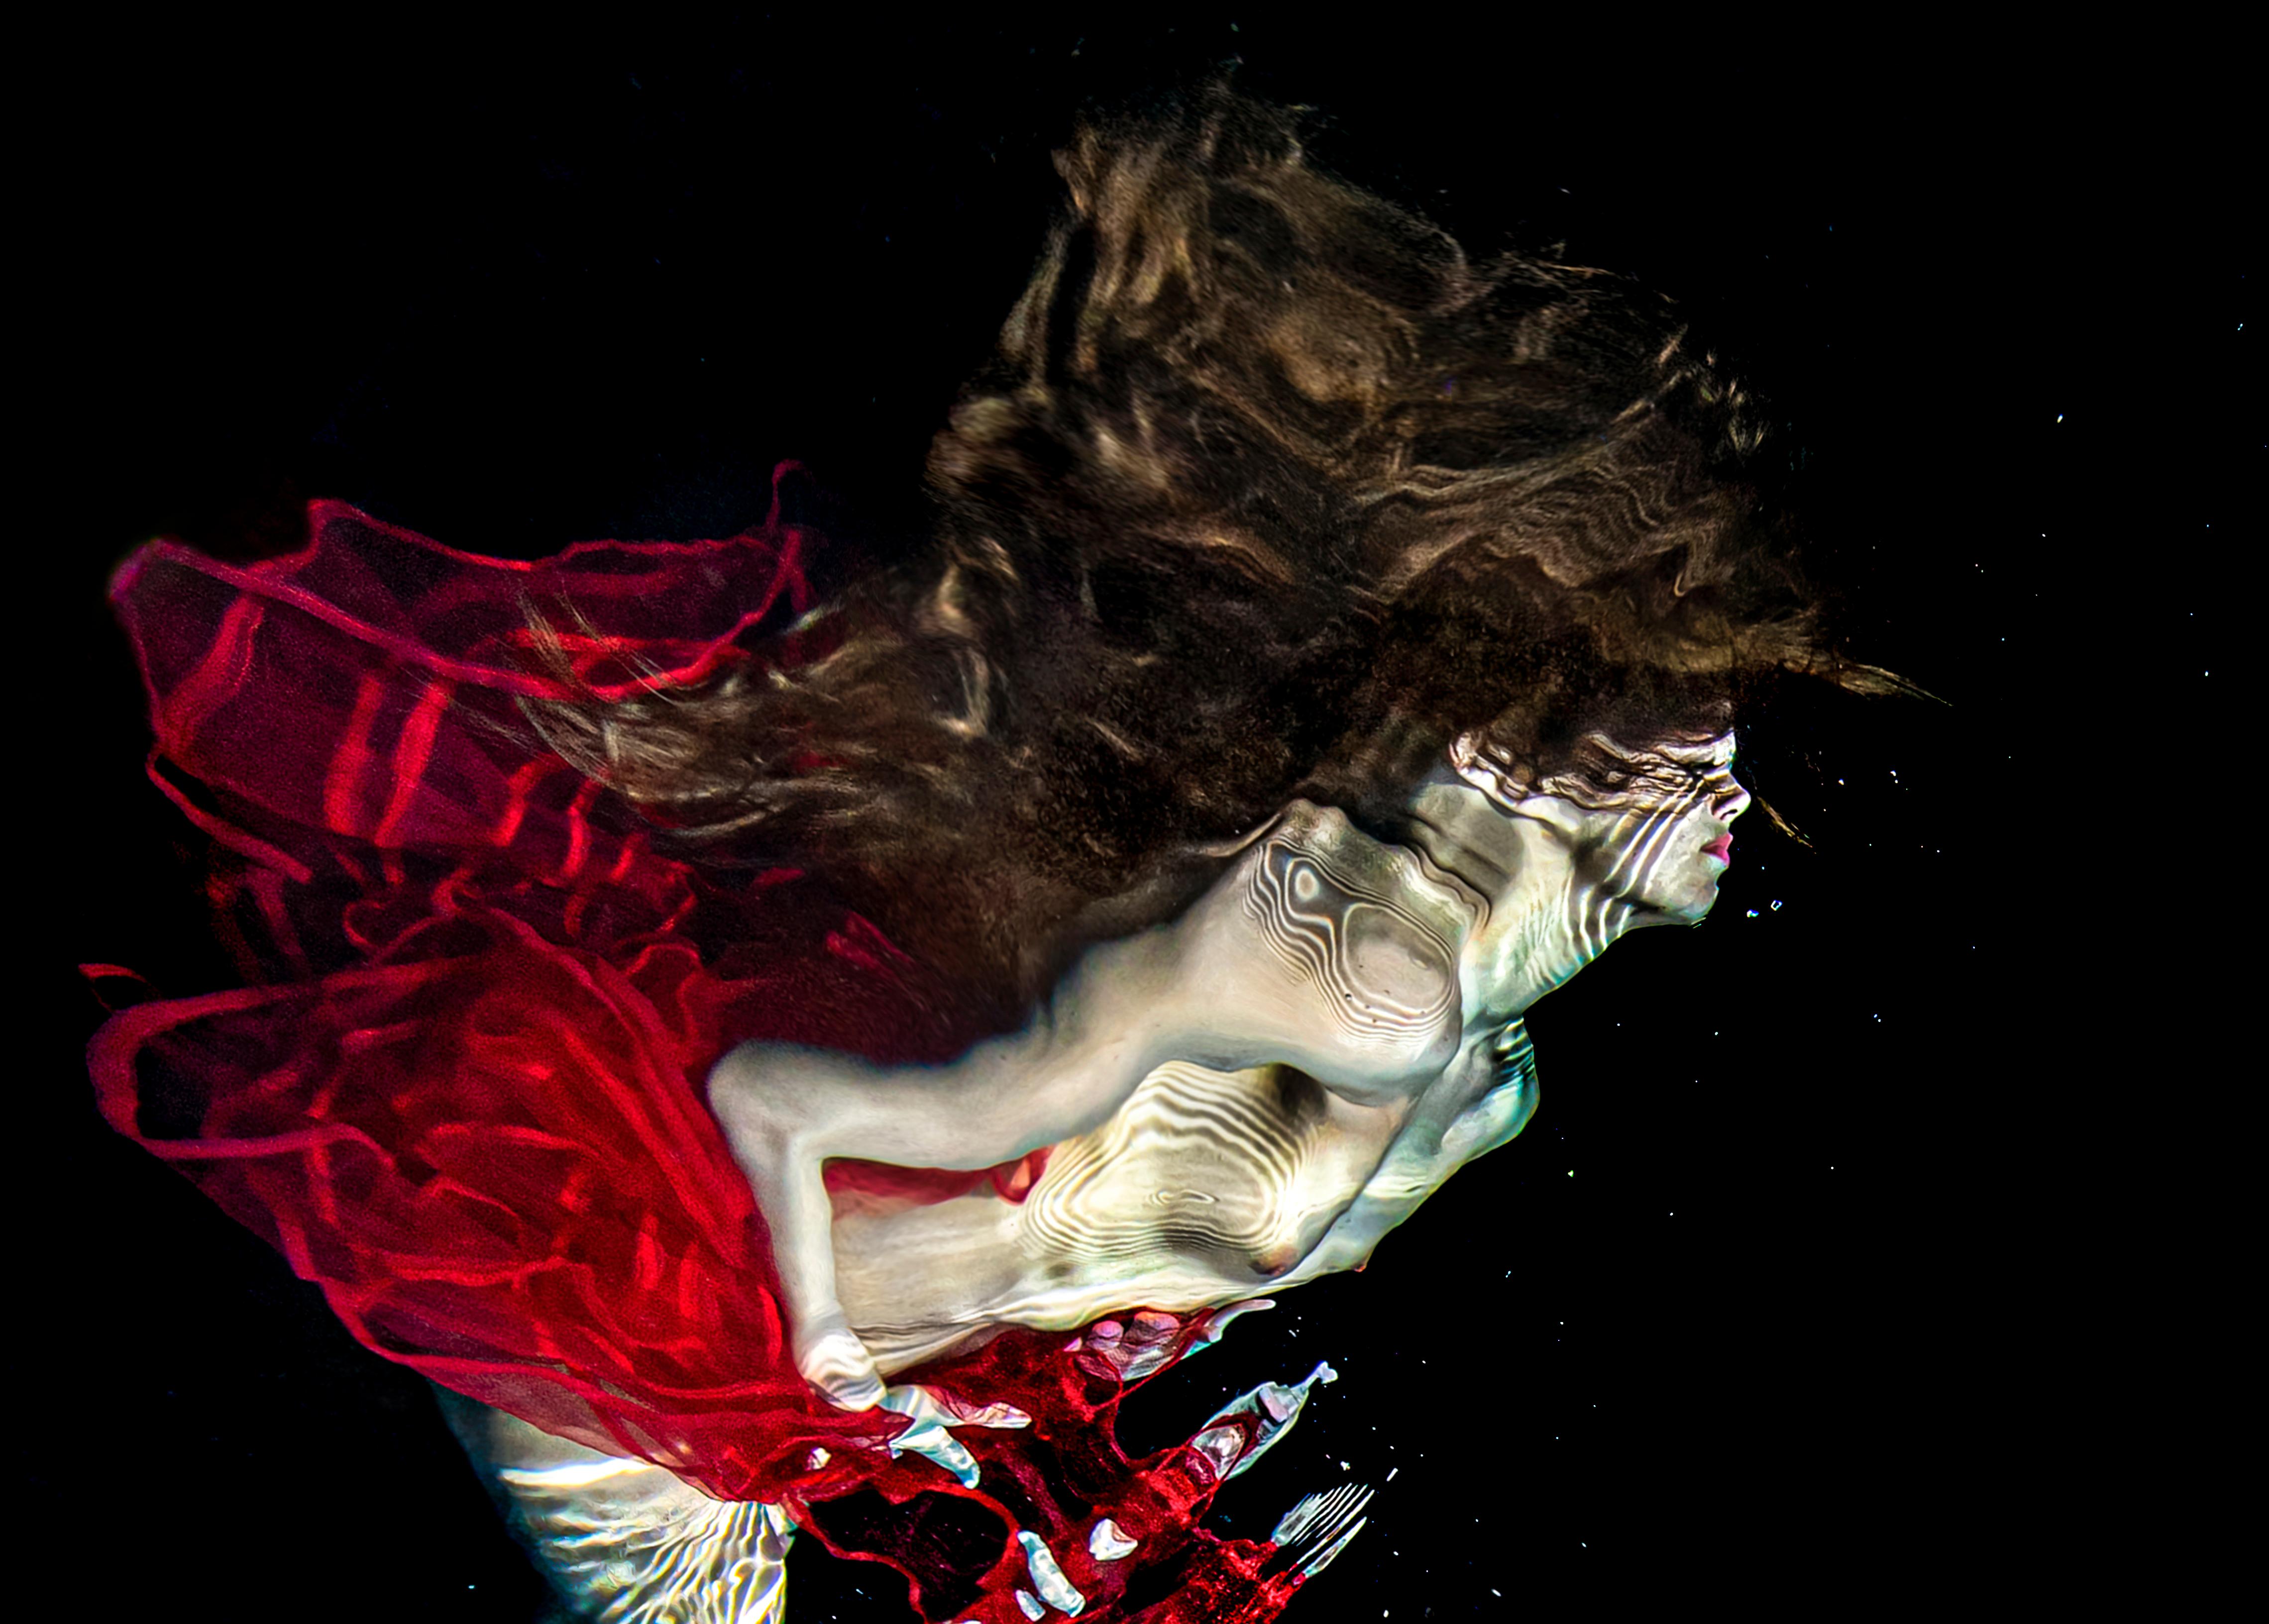 Salsa - underwater nude photograph series REFLECTIONS - archival pigment 23x35